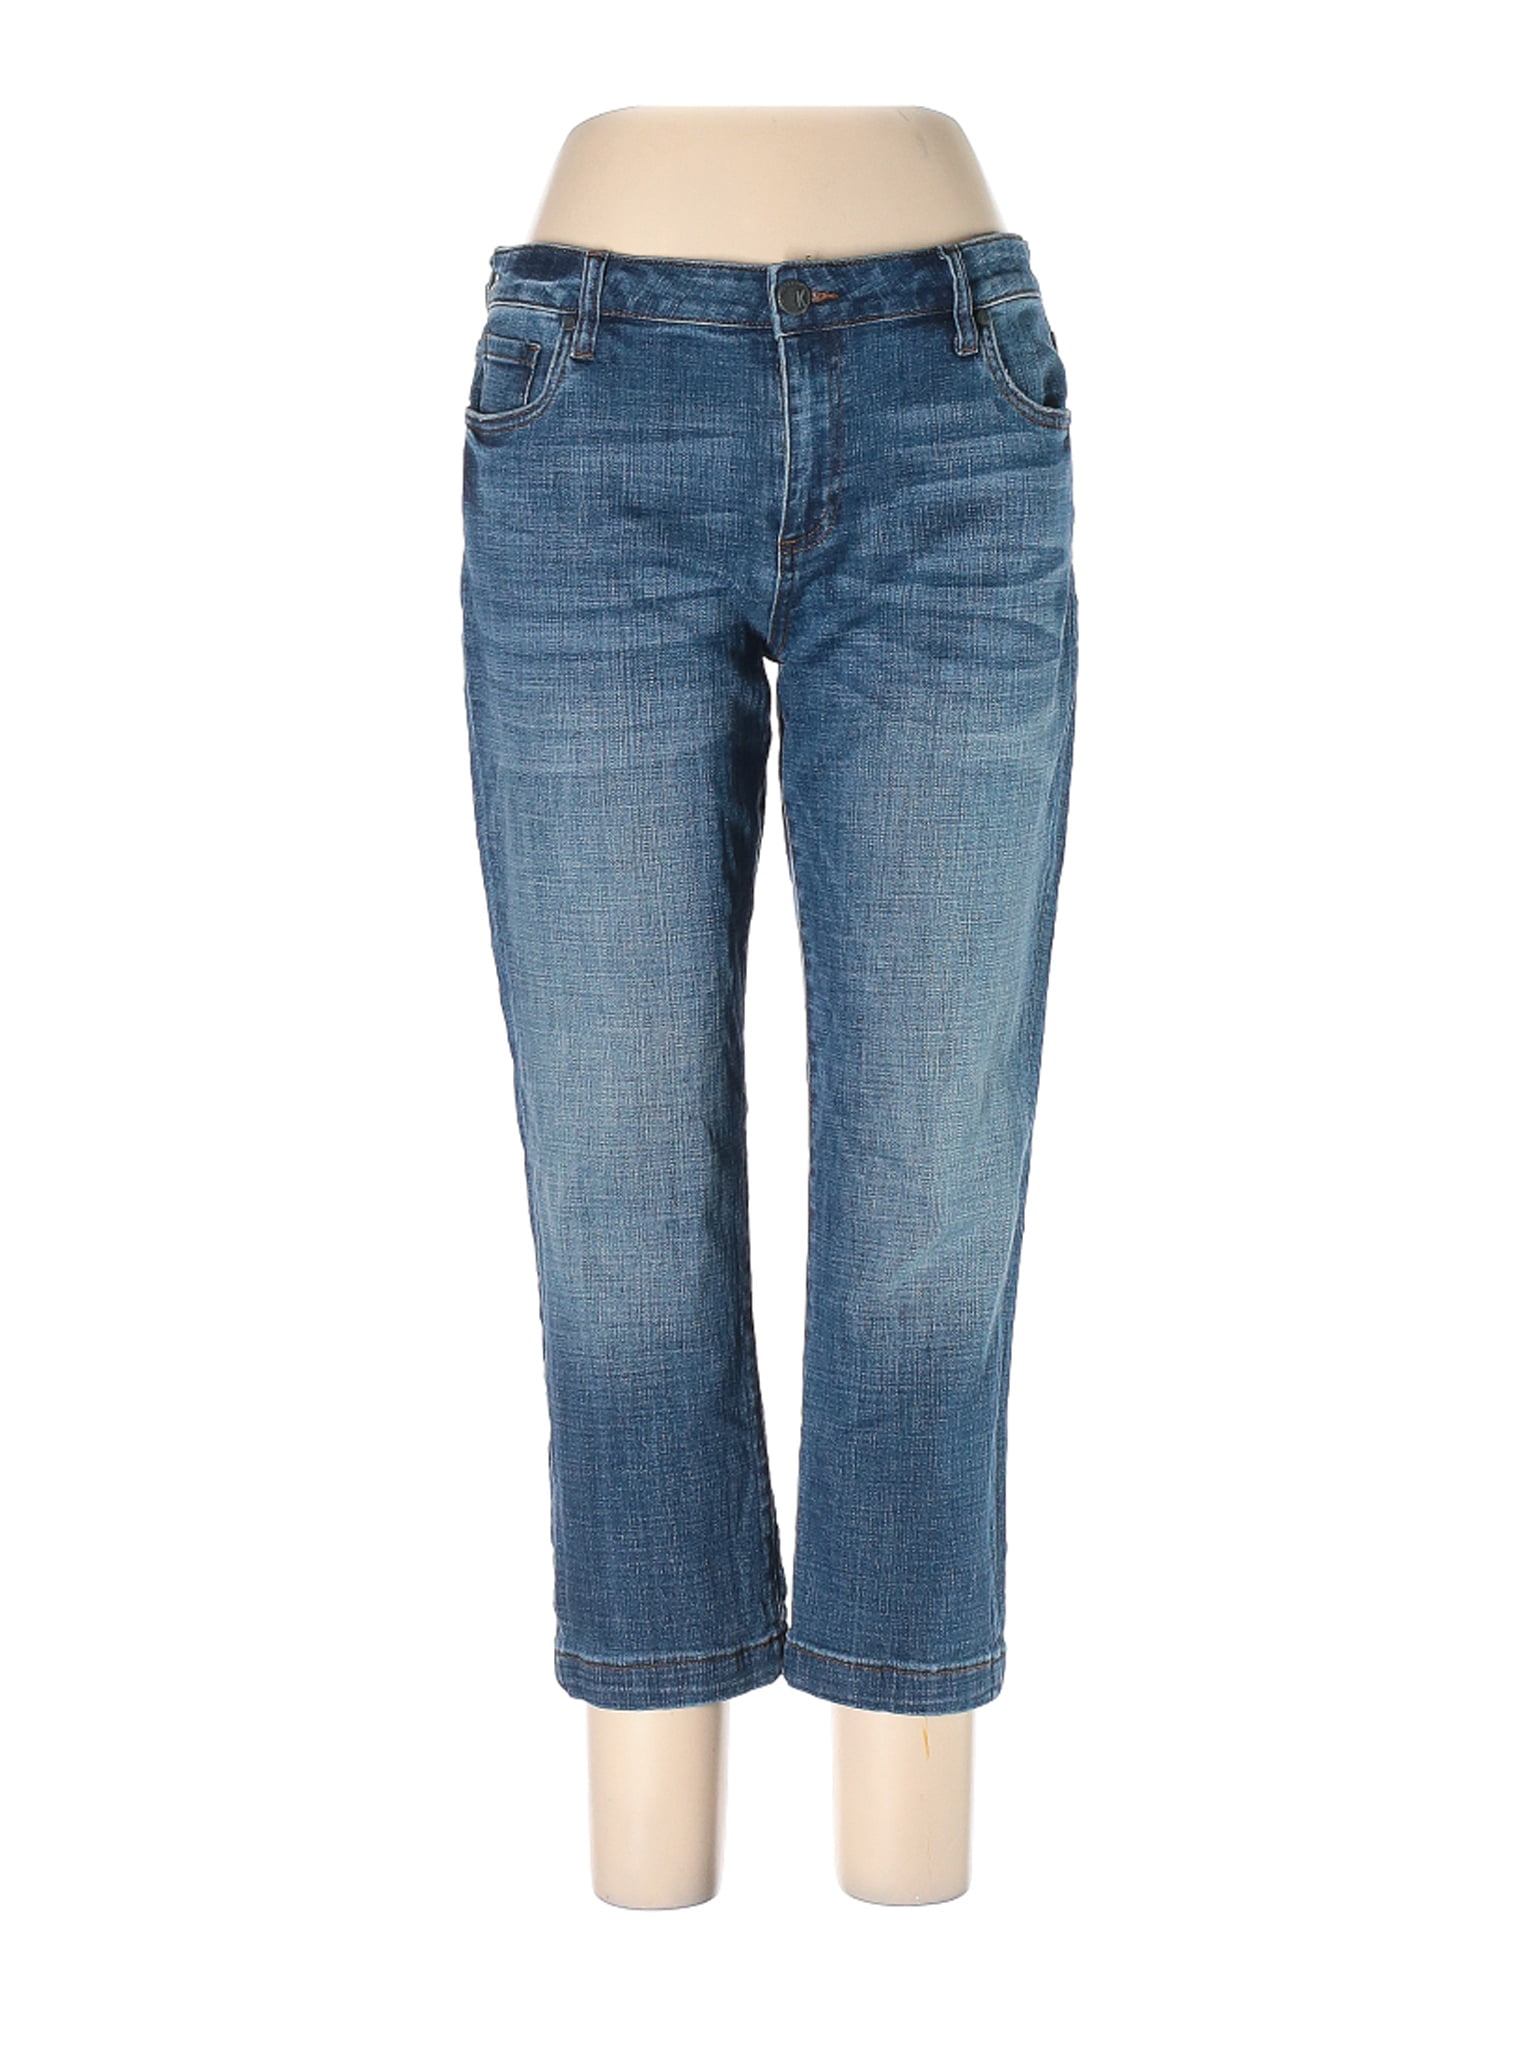 KUT from the Kloth - Pre-Owned Kut from the Kloth Women's Size 12 Jeans ...